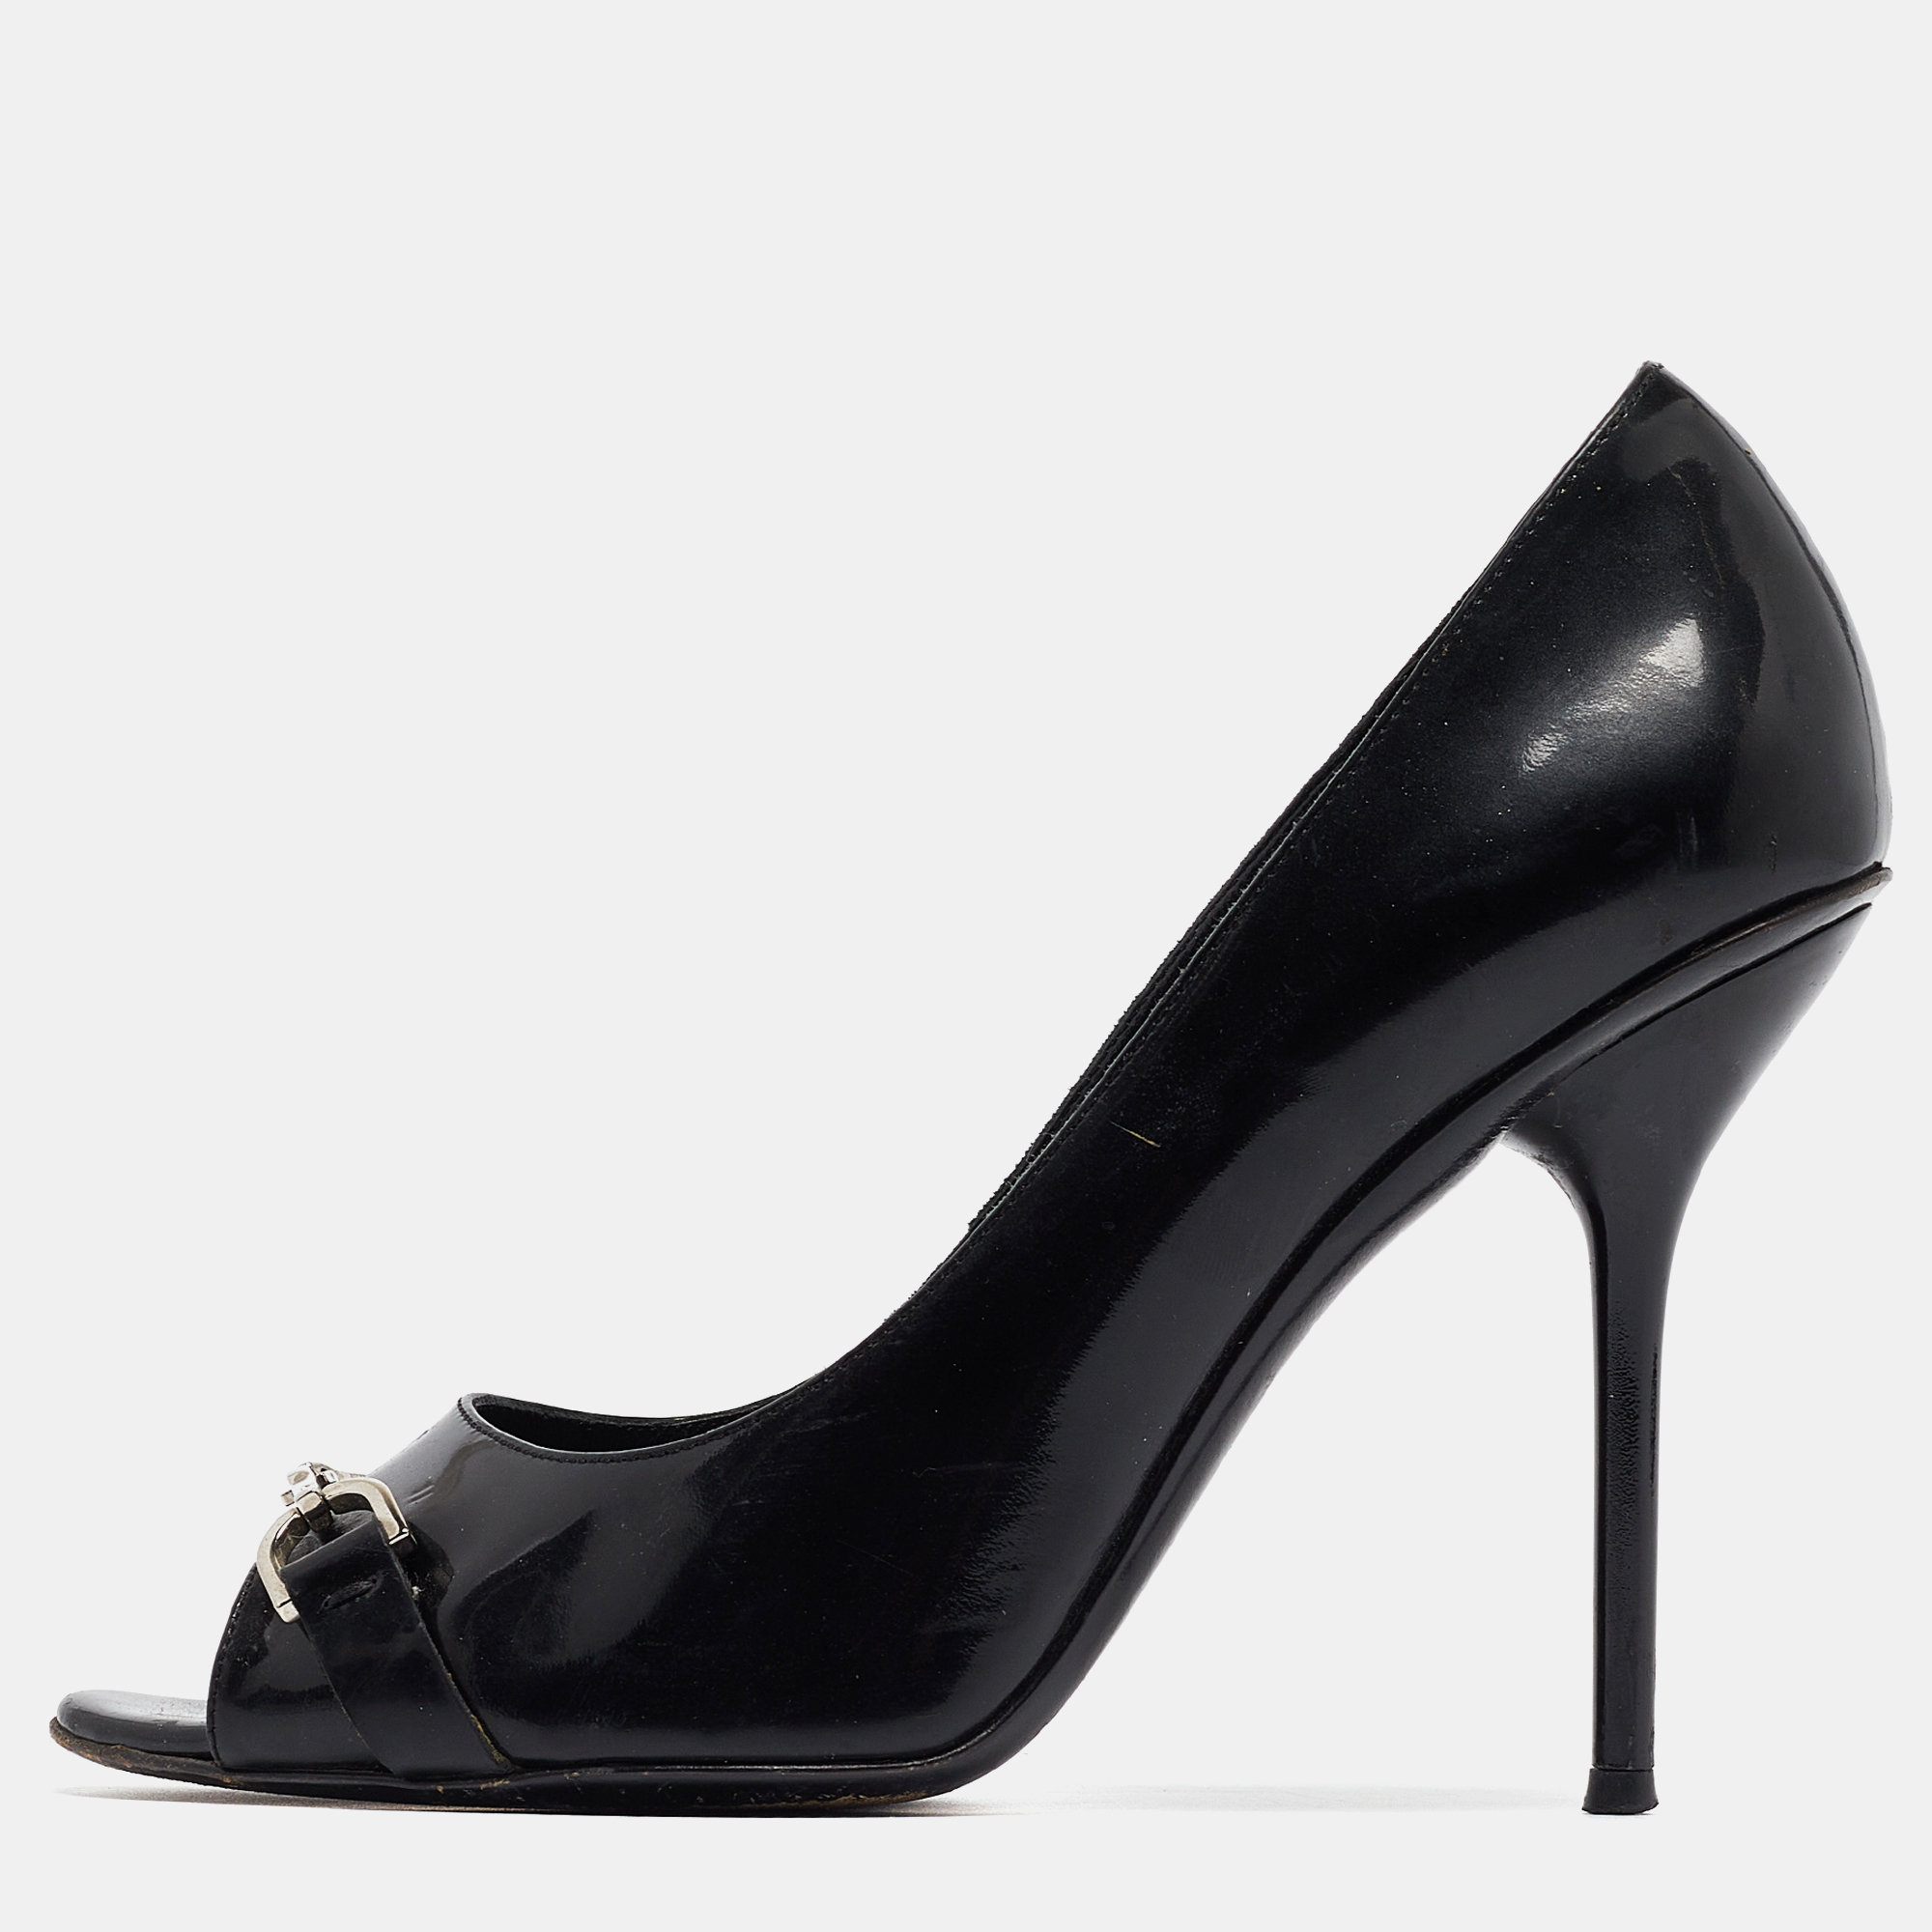 Pre-owned Gucci Black Patent Peep Toe Pumps Size 38